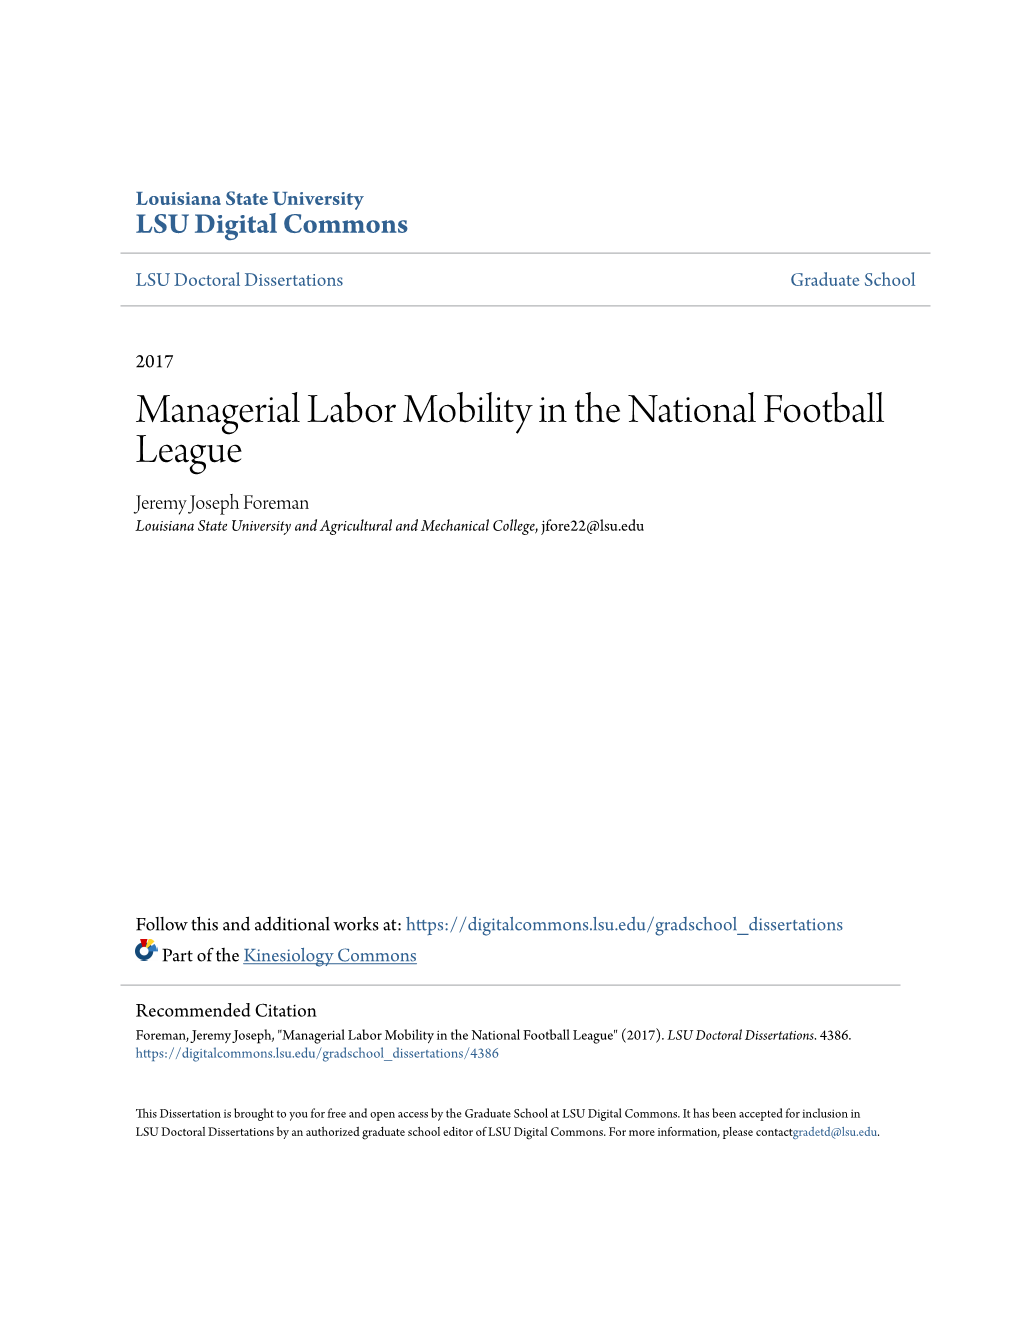 Managerial Labor Mobility in the National Football League Jeremy Joseph Foreman Louisiana State University and Agricultural and Mechanical College, Jfore22@Lsu.Edu